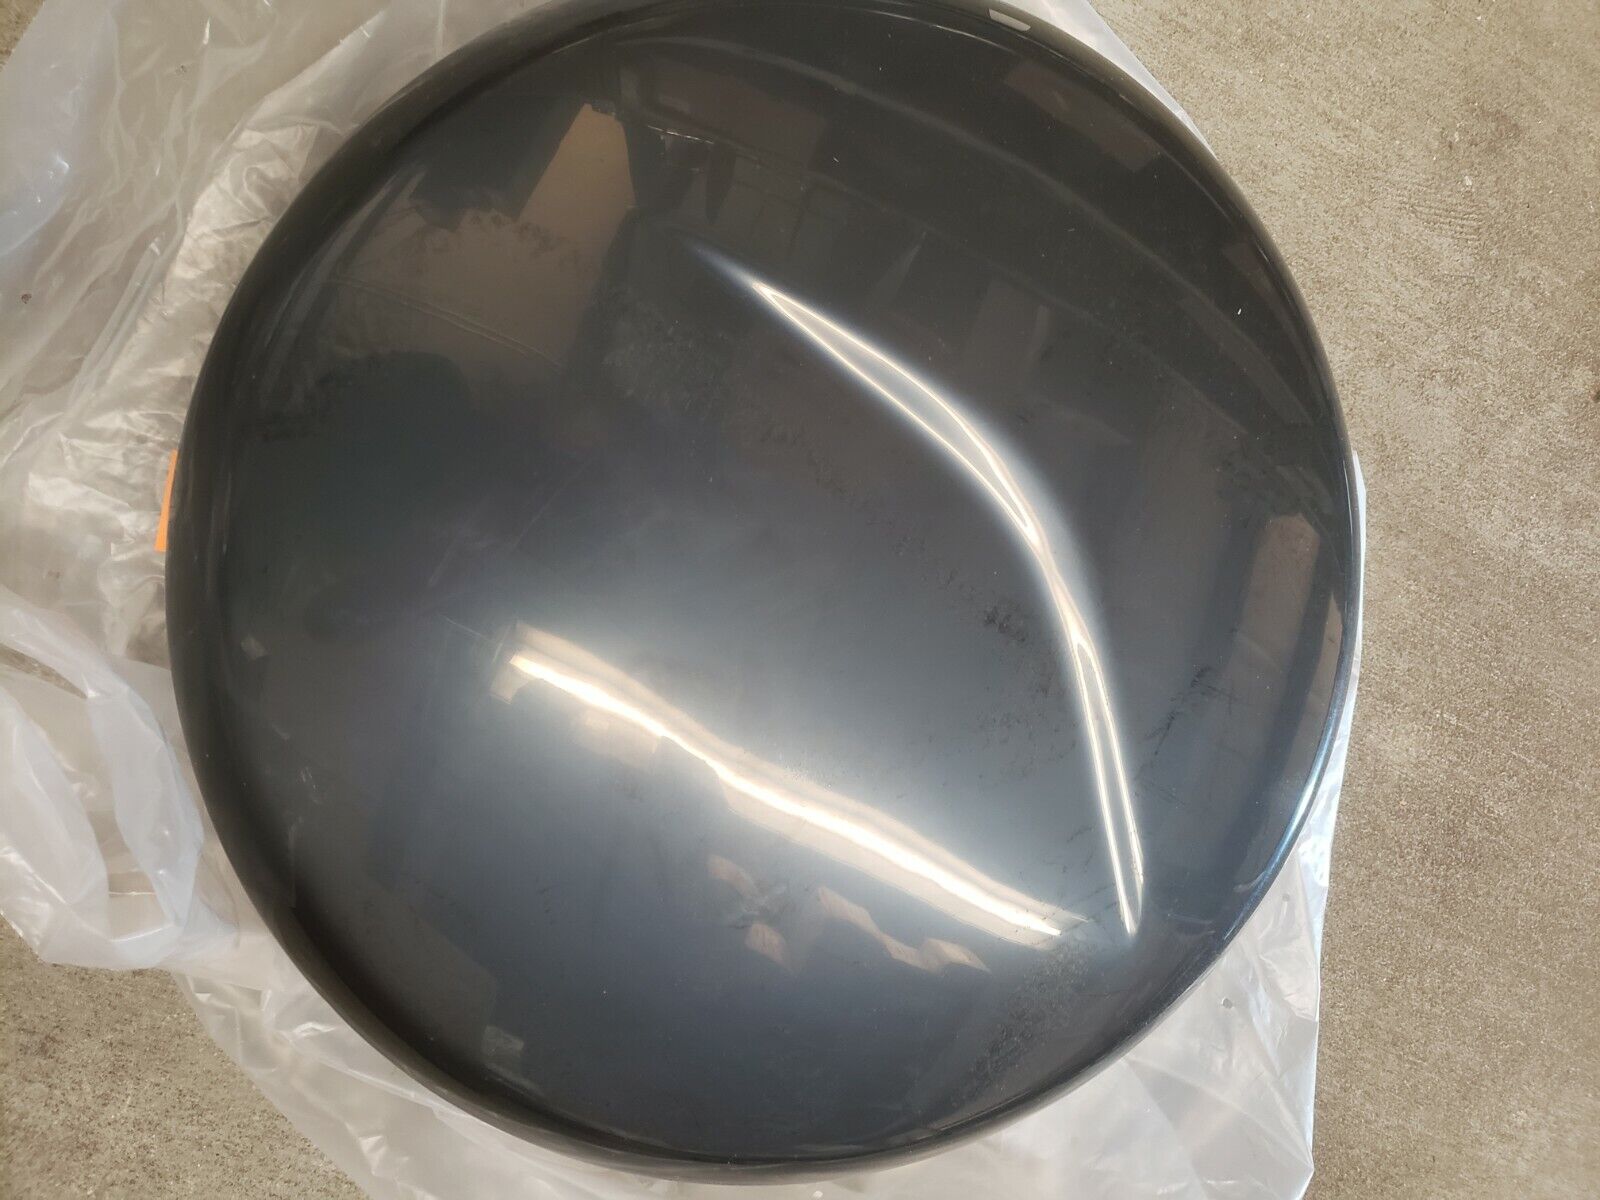 OEM TOYOTA RAV4 SPARE TIRE WHEEL COVER REPLACEMENT **UNPAINTED**